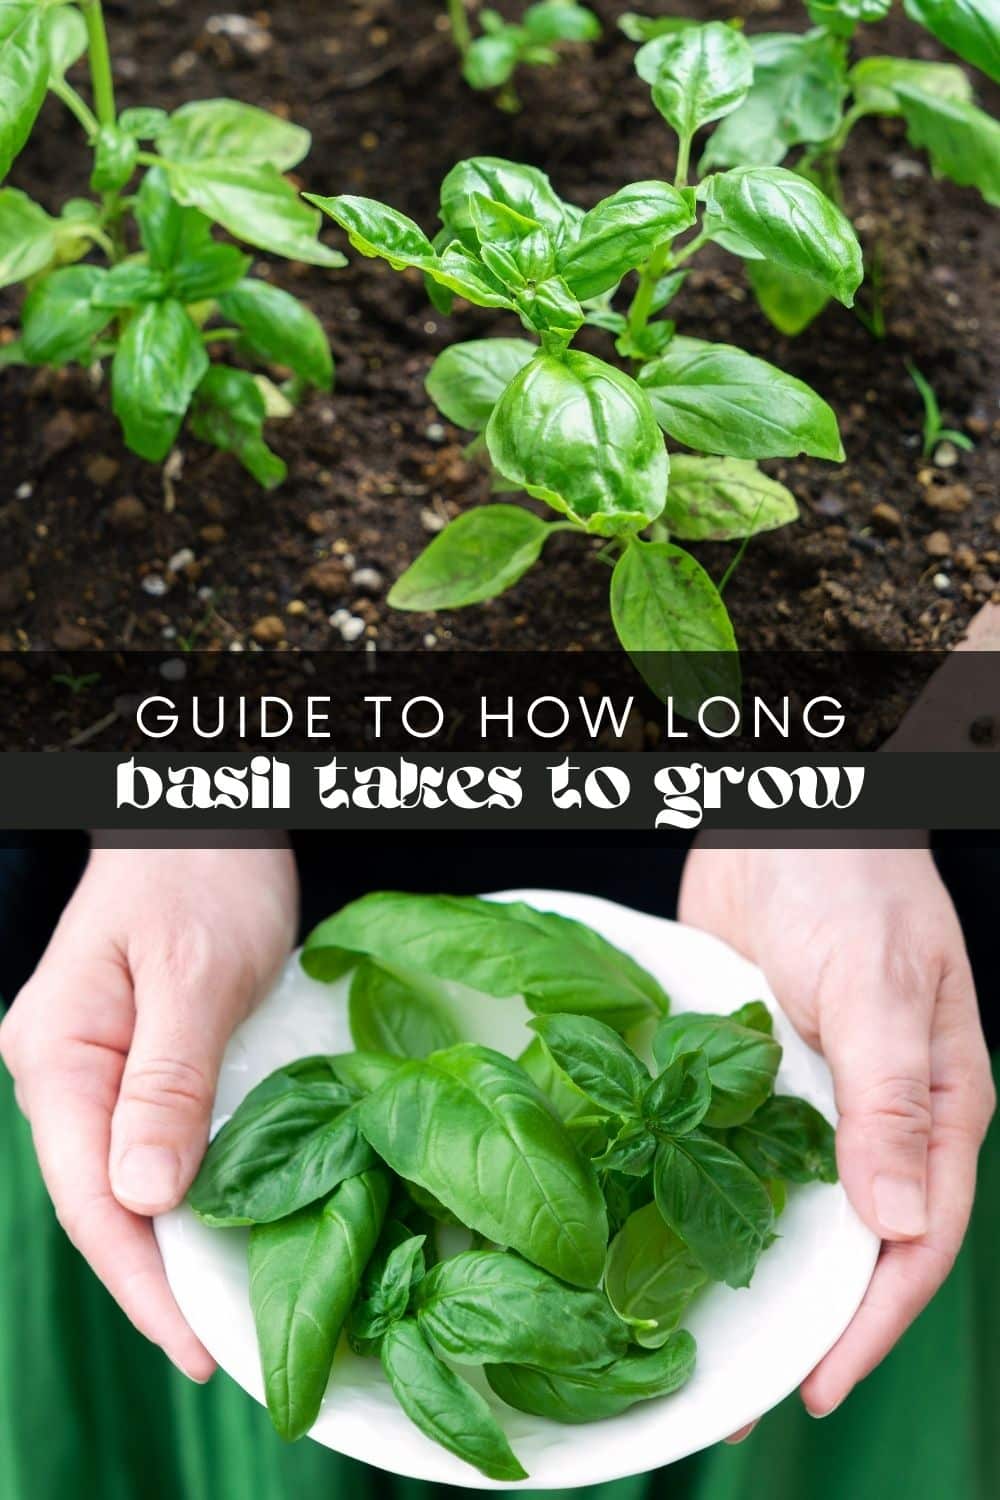 Growing herbs at home is an easy and budget-friendly way to add freshness to your meals! If you're looking to start a herb garden, basil is probably one of the first herbs you'll want to grow. It's versatile and adds a ton of flavor to many dishes. But how long does basil take to grow, and what do you need to know before planting?